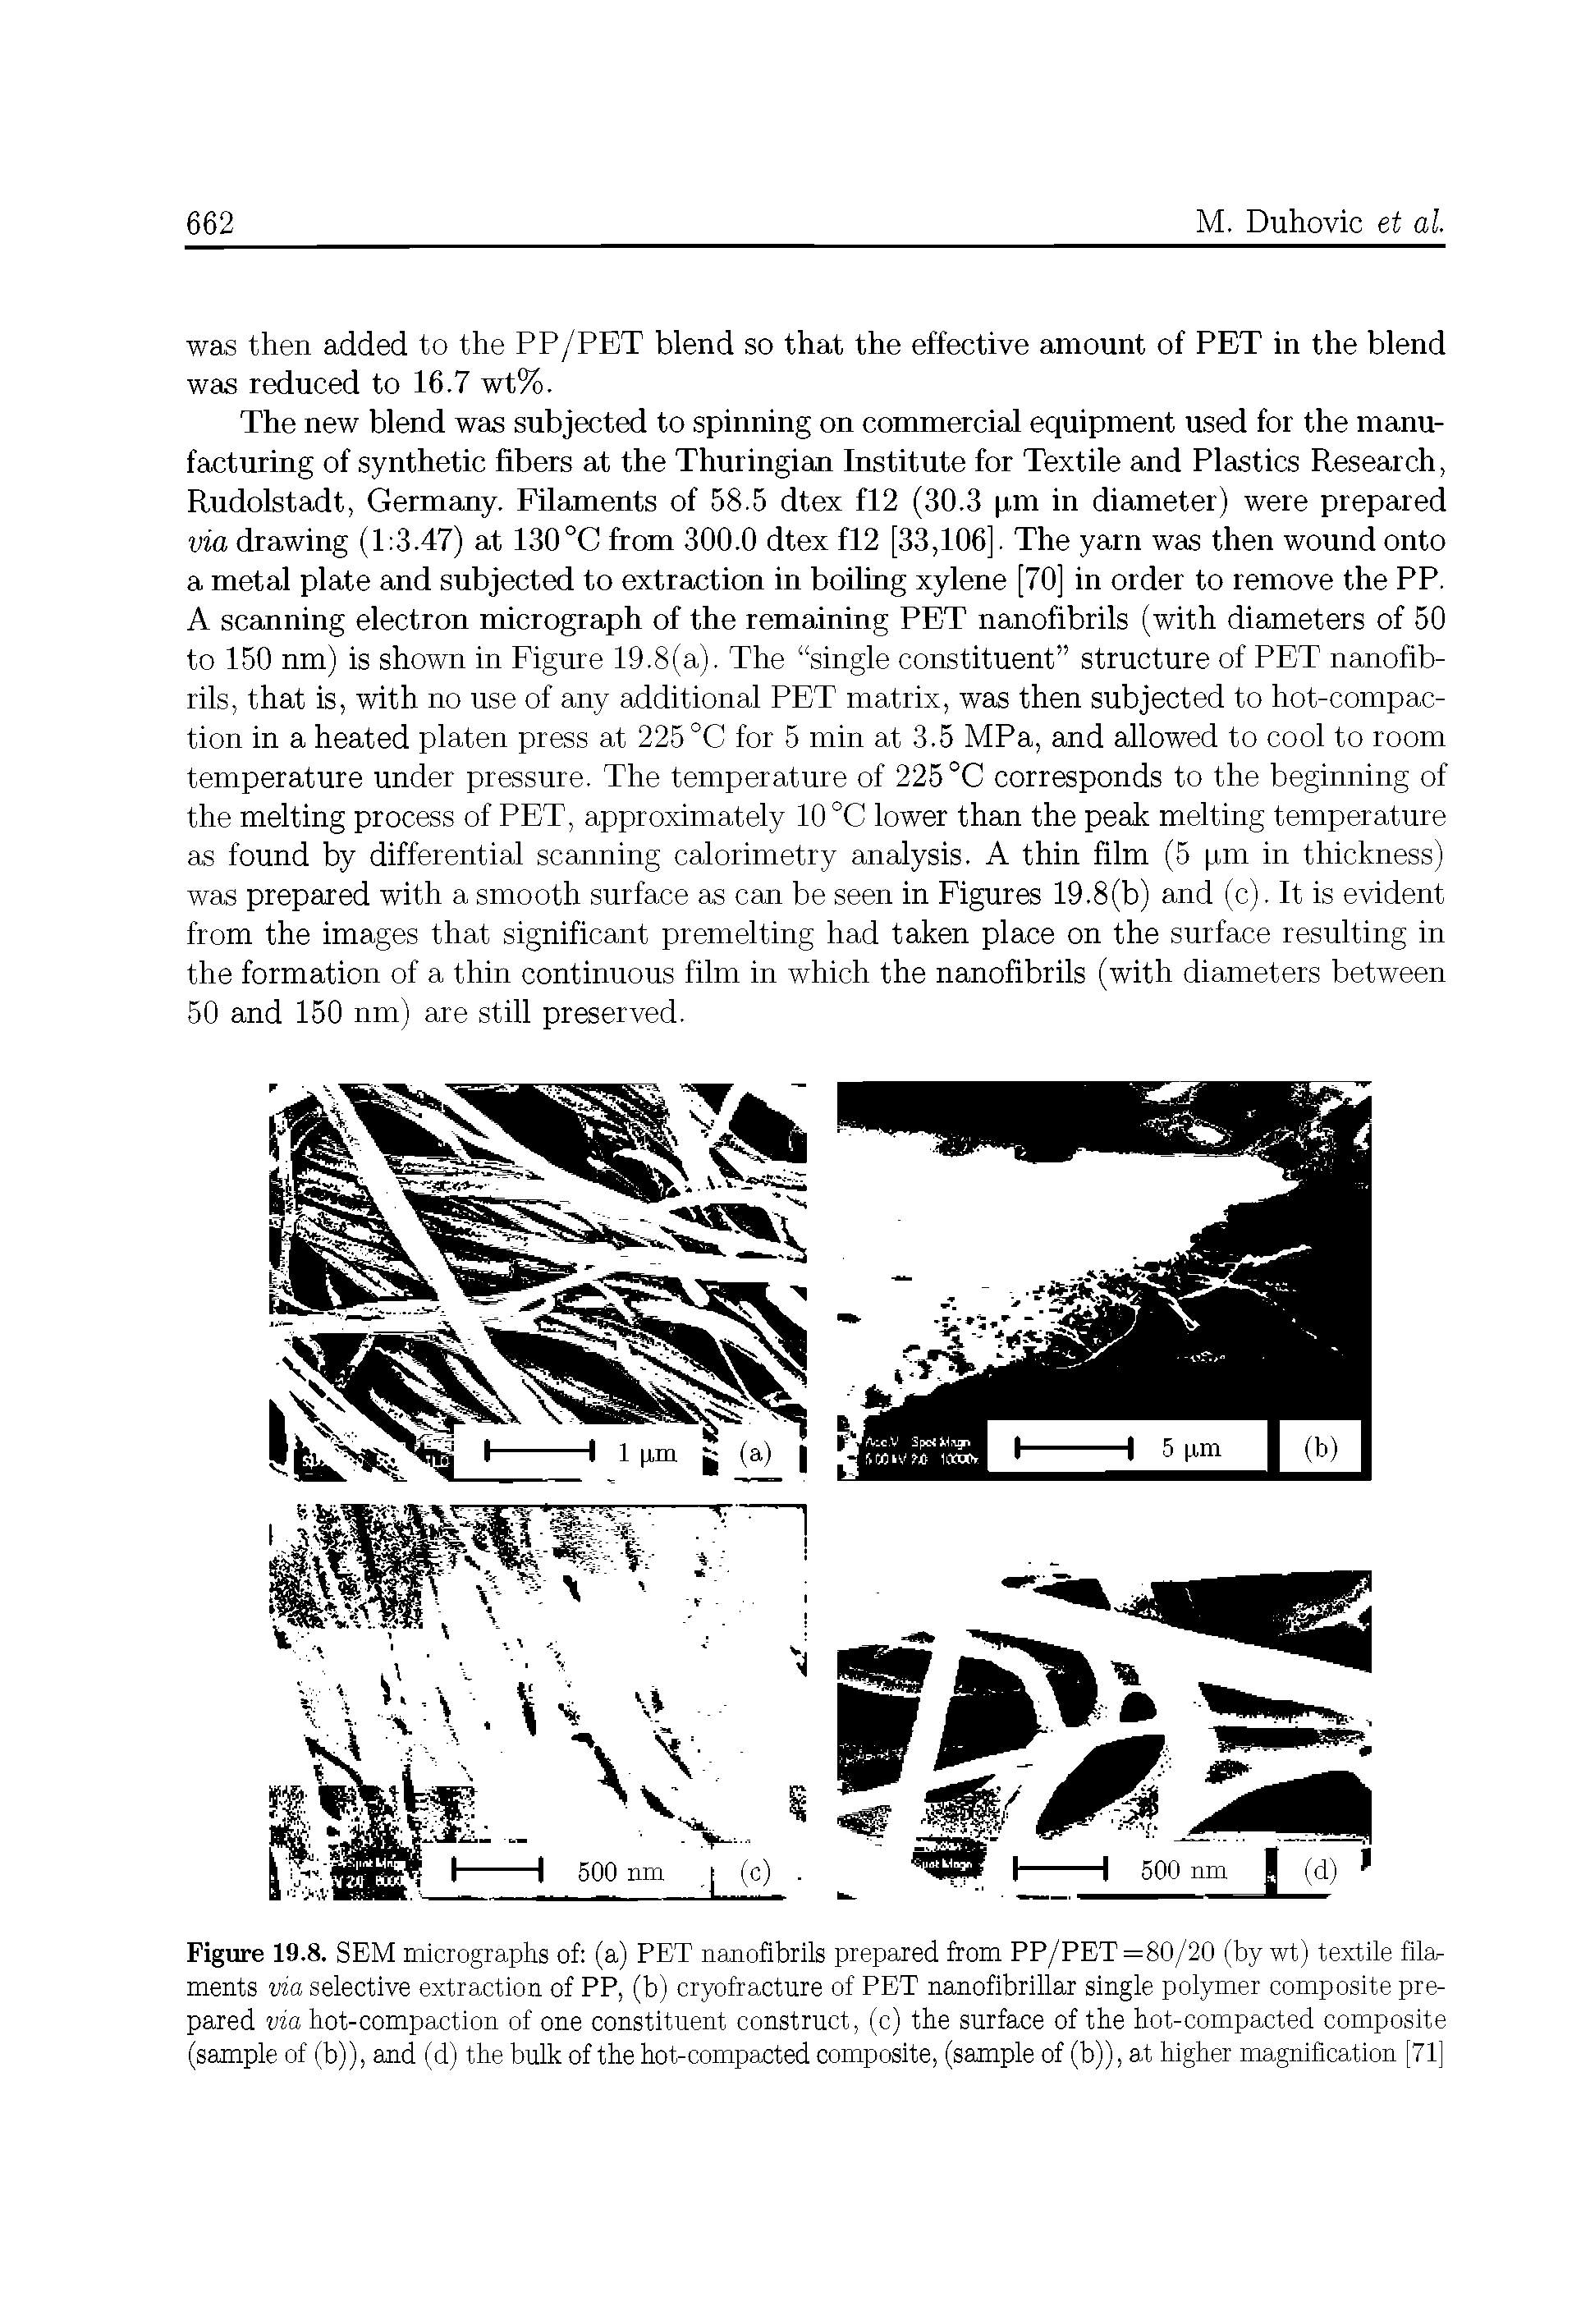 Figure 19.8. SEM micrographs of (a) PET nanoflbrils prepared from PP/PET =80/20 (by wt) textile filaments via selective extraction of PP, (b) cryofracture of PET nanofibriUar single polymer composite prepared via hot-compaction of one constituent construct, (c) the surface of the hot-compacted composite (sample of (b)), and (d) the buUc of the hot-compacted composite, (sample of (b)), at higher magnification [71]...